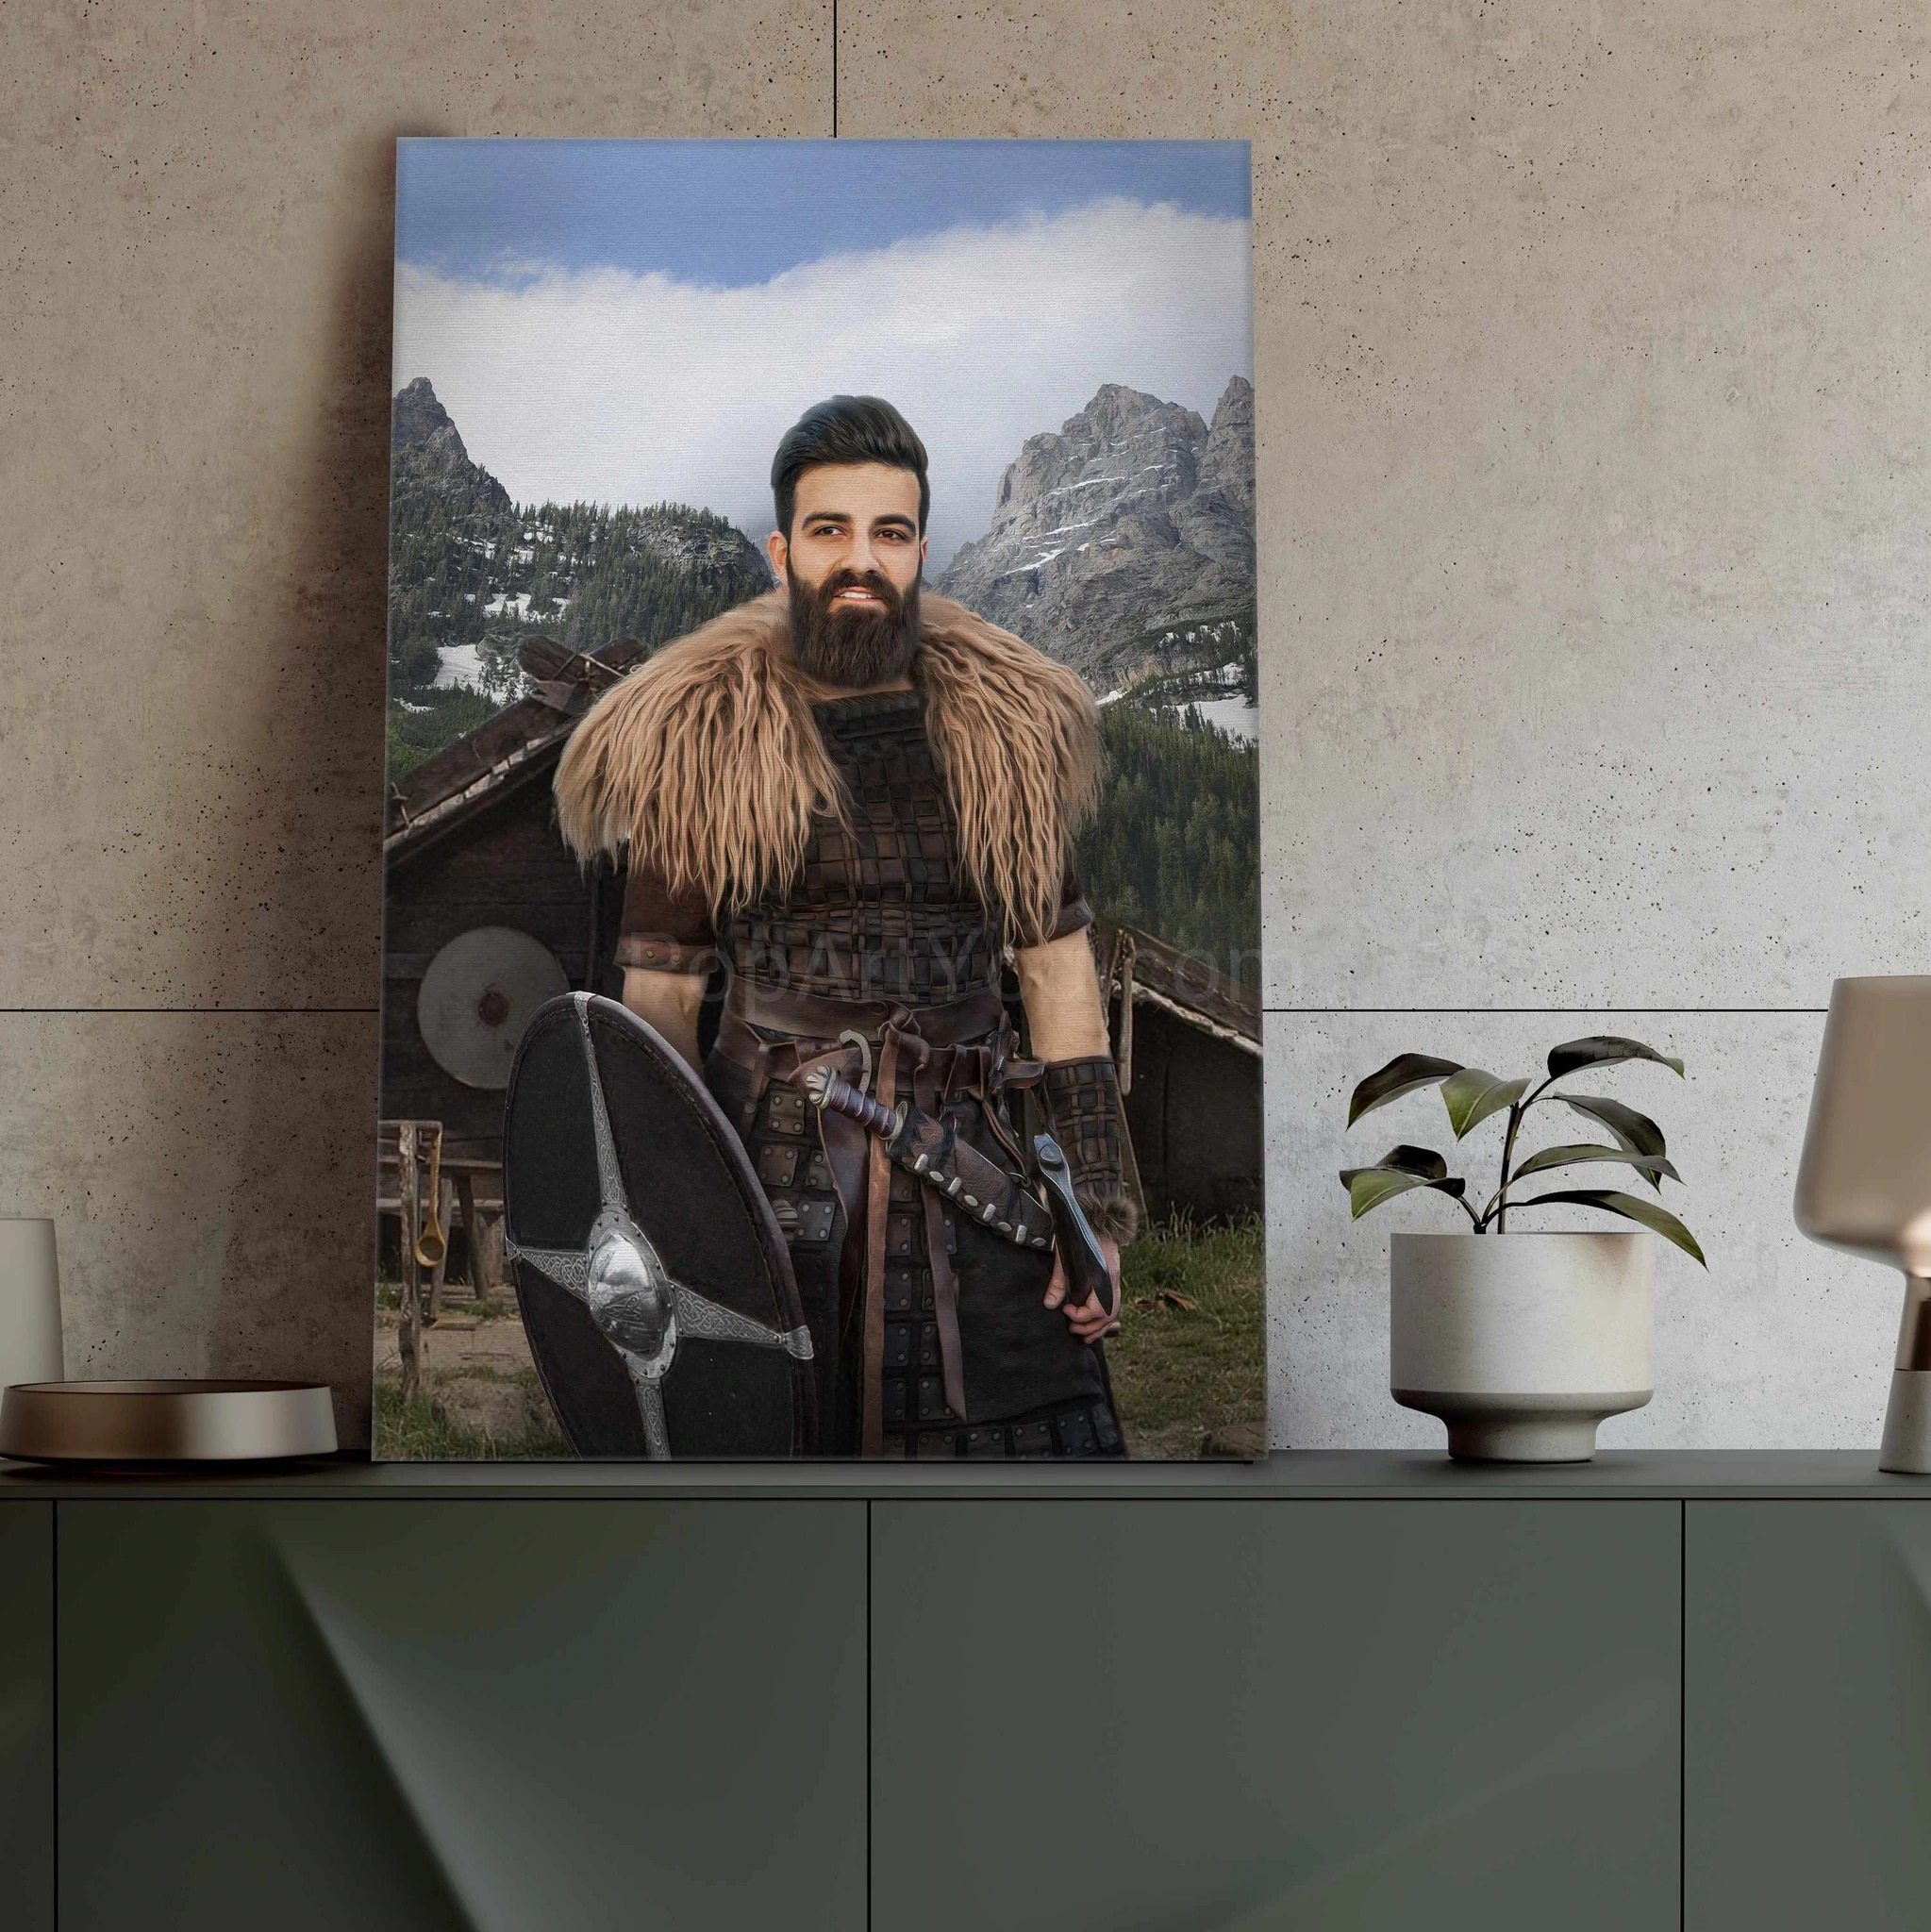 The Viking Personalized Male Portrait Poster Canvas Print